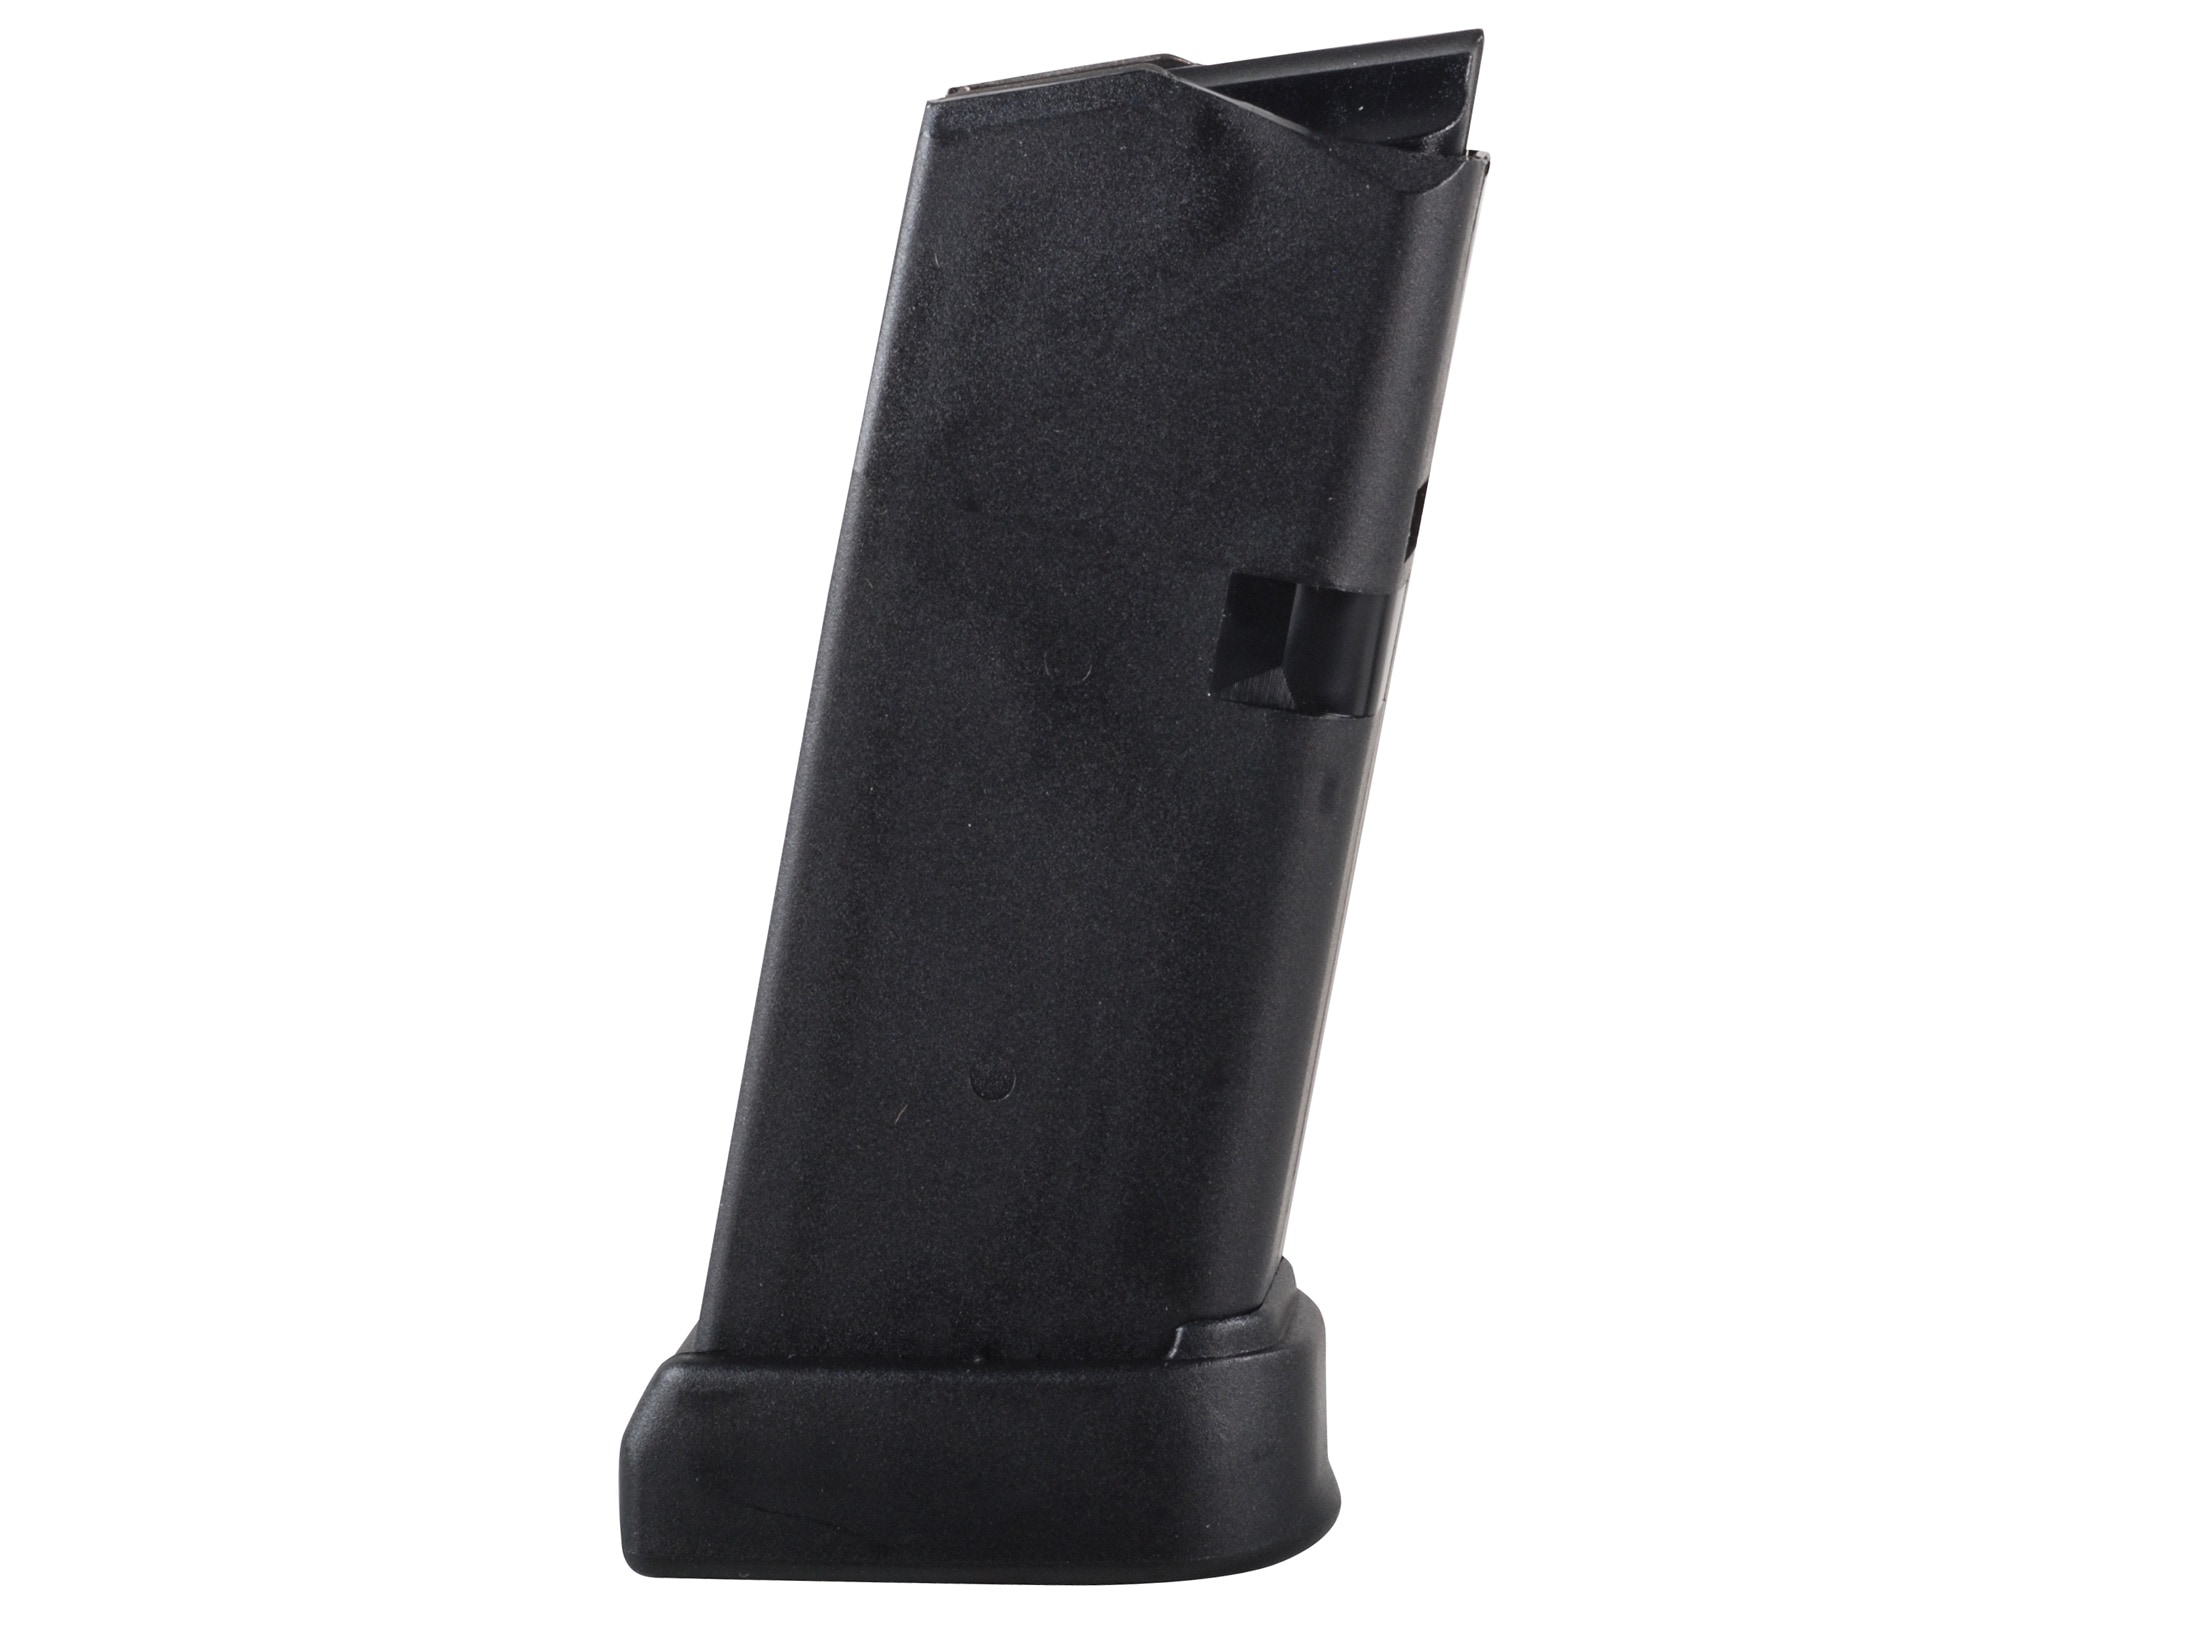 New Factory Glock Model 30 G30 Magazine Mag Clip 10rd for 45 ACP 